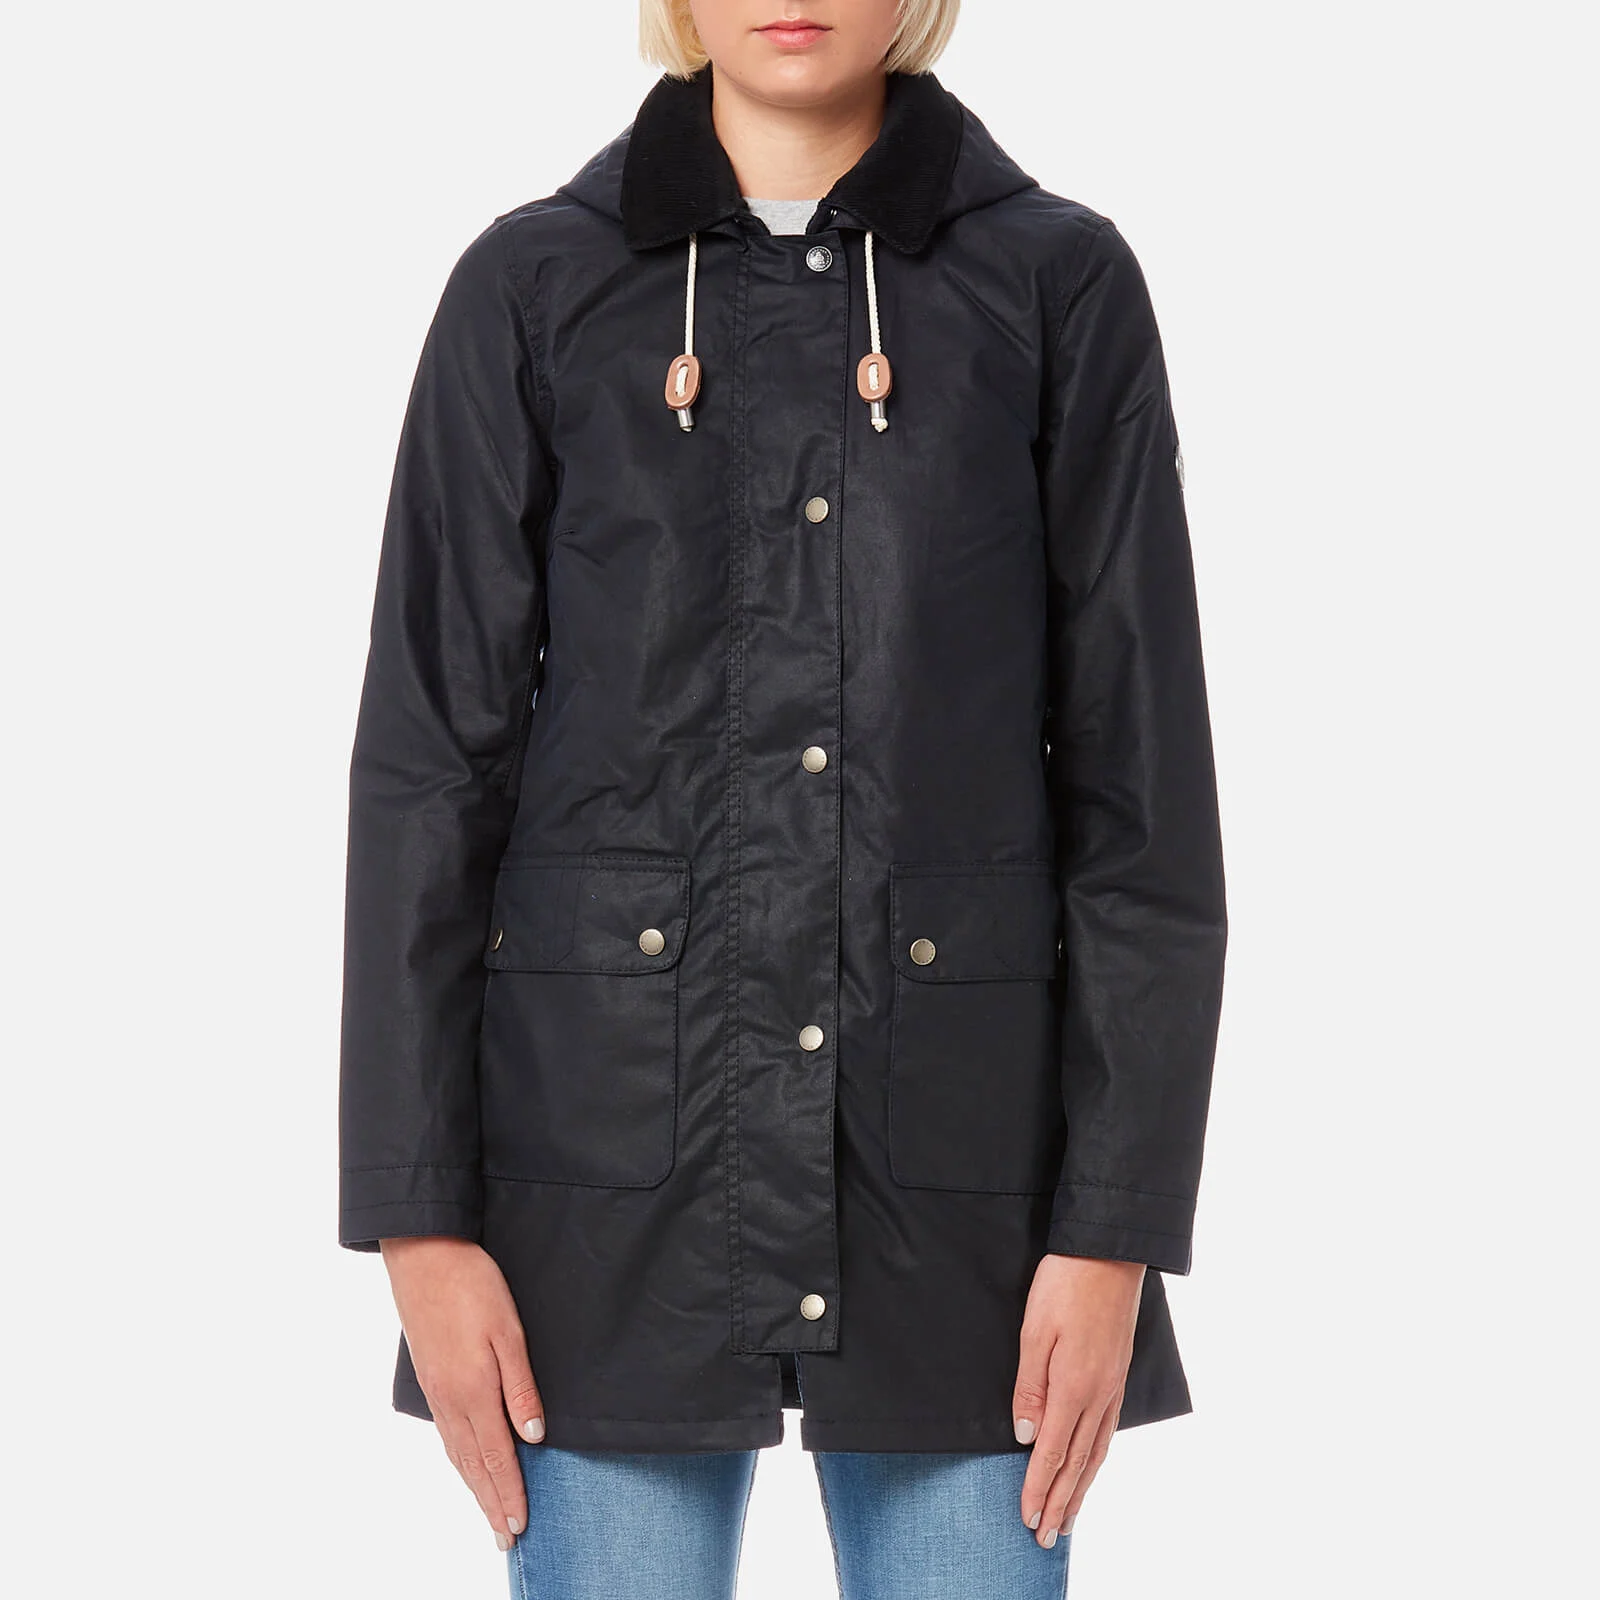 Barbour Women's Whitmore Wax Jacket - Royal Navy Image 1